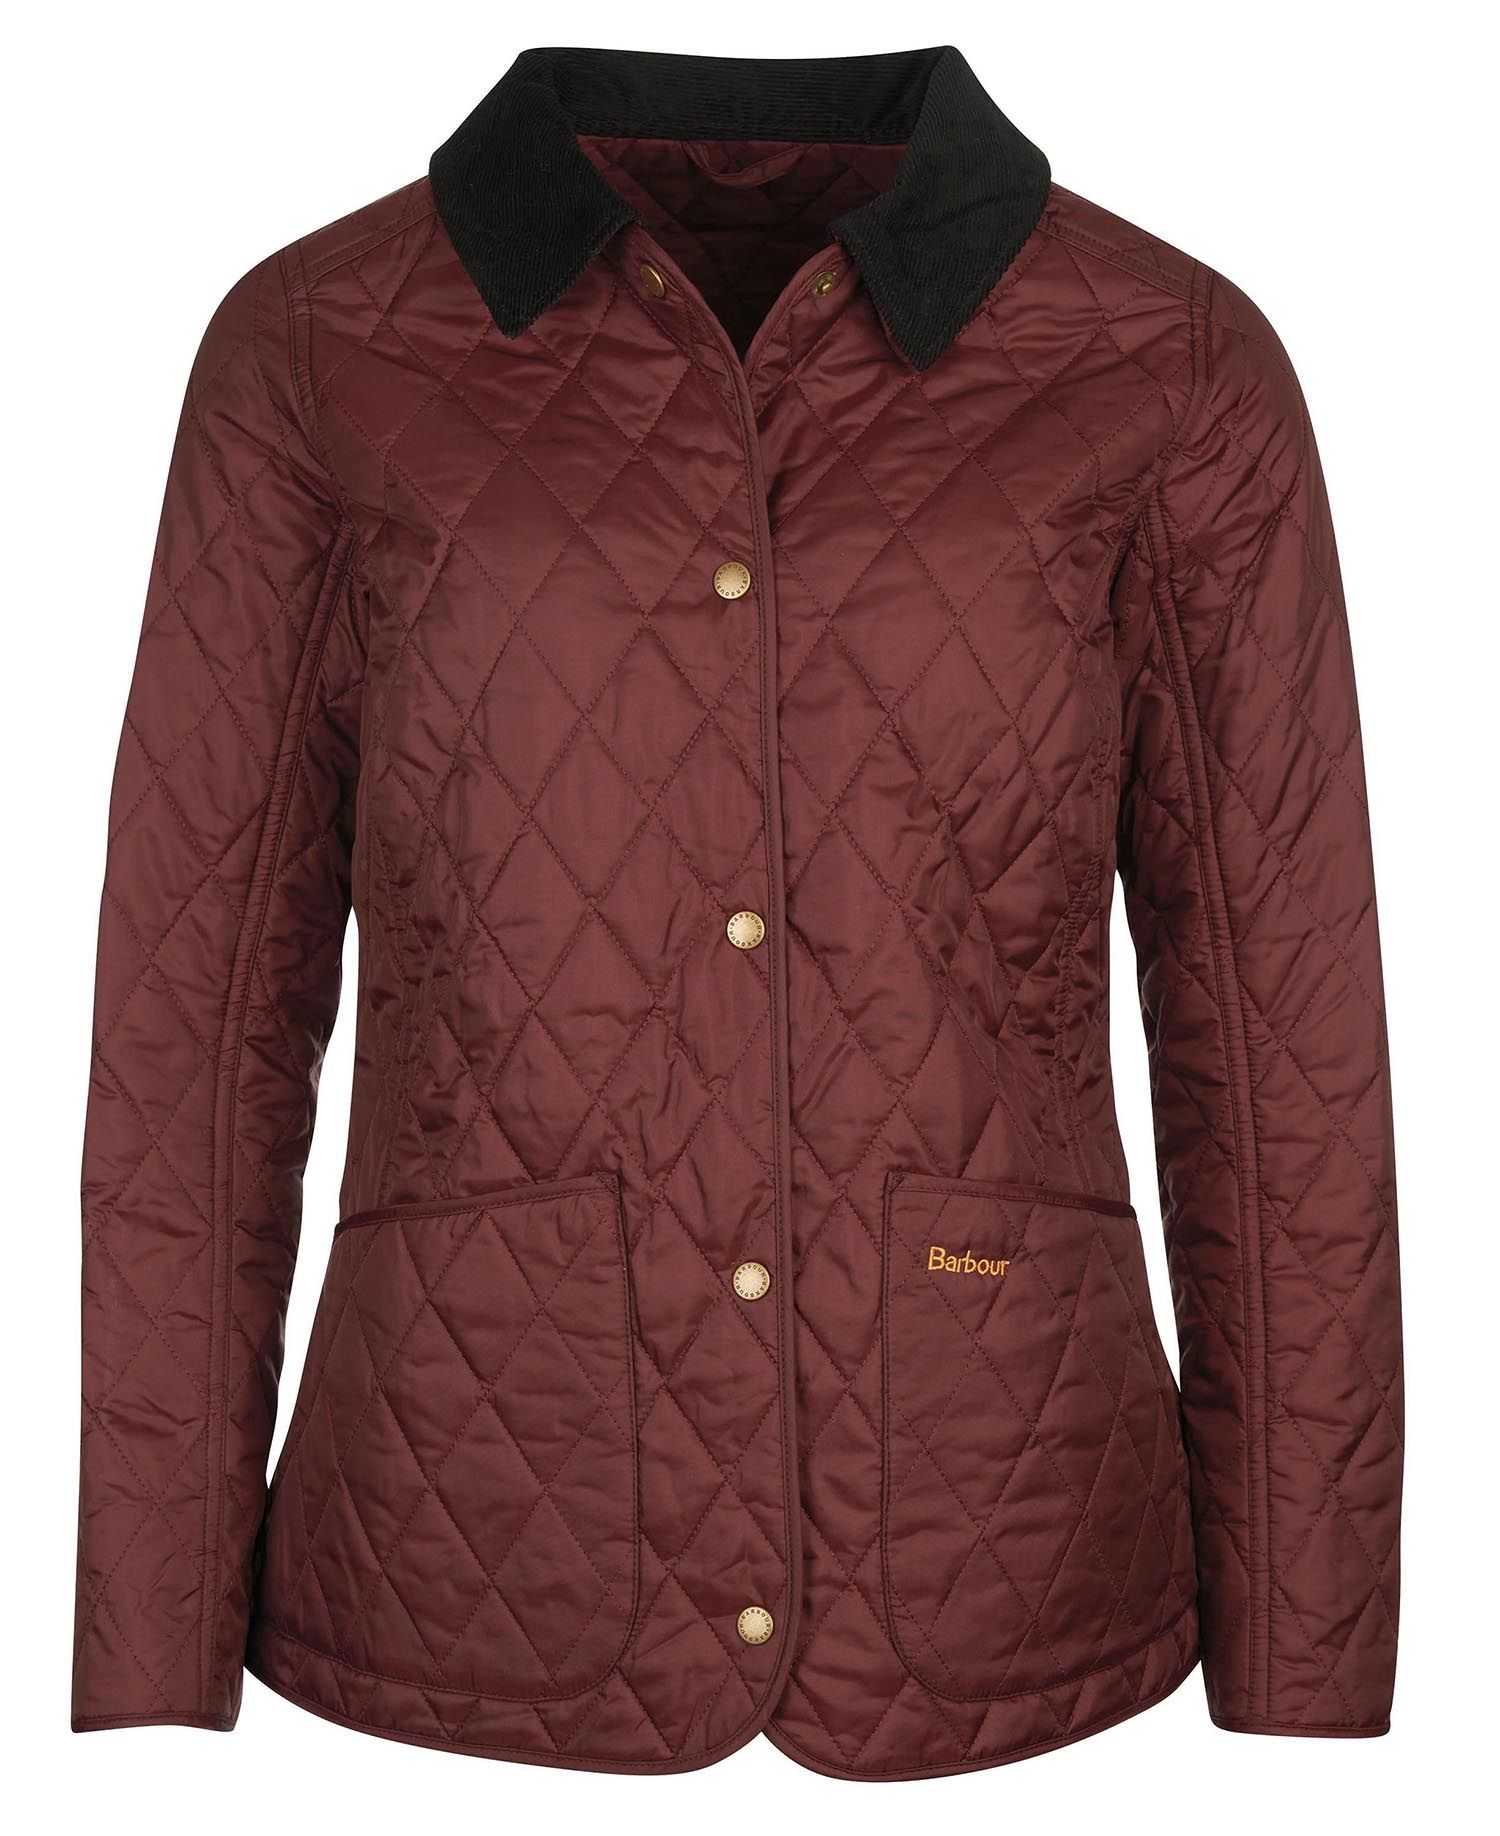 Barbour Annandale Quilted Jacket - Dark Plum SeriousCountrySports.com